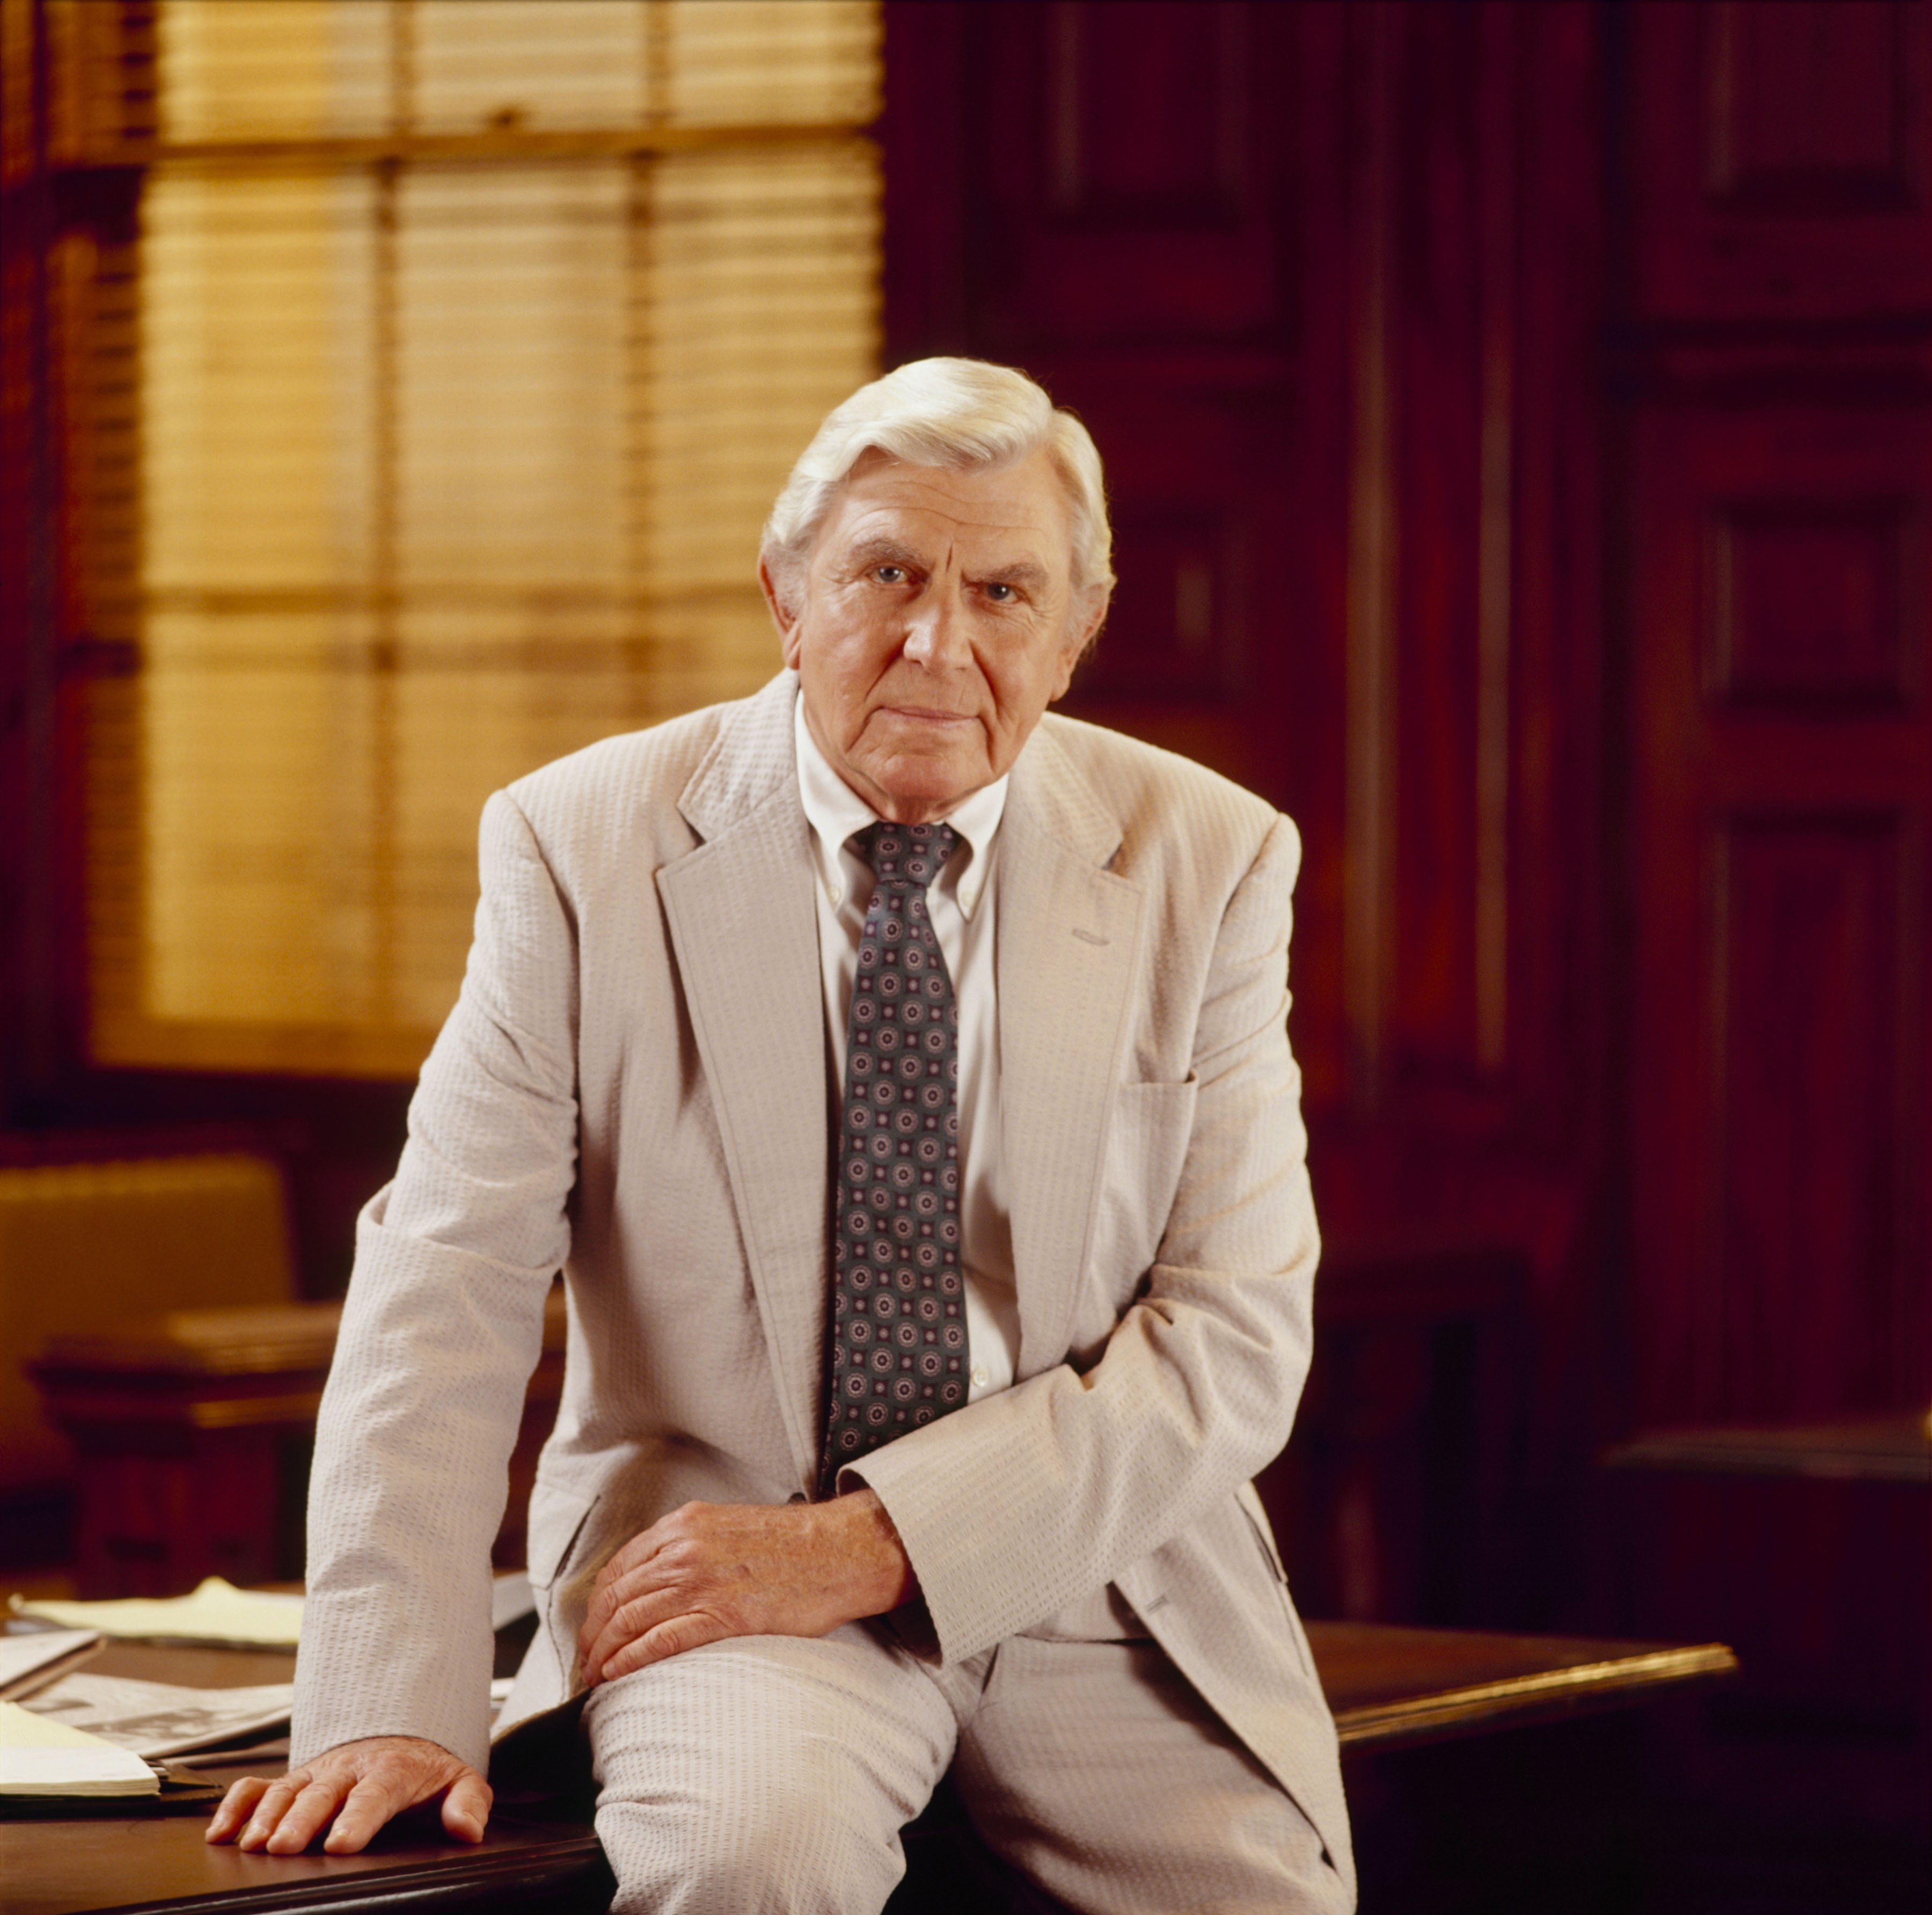 A picture taken of Andy Griffith while he starred in "Matlock" on November 24, 1992. | Source: Getty Images.